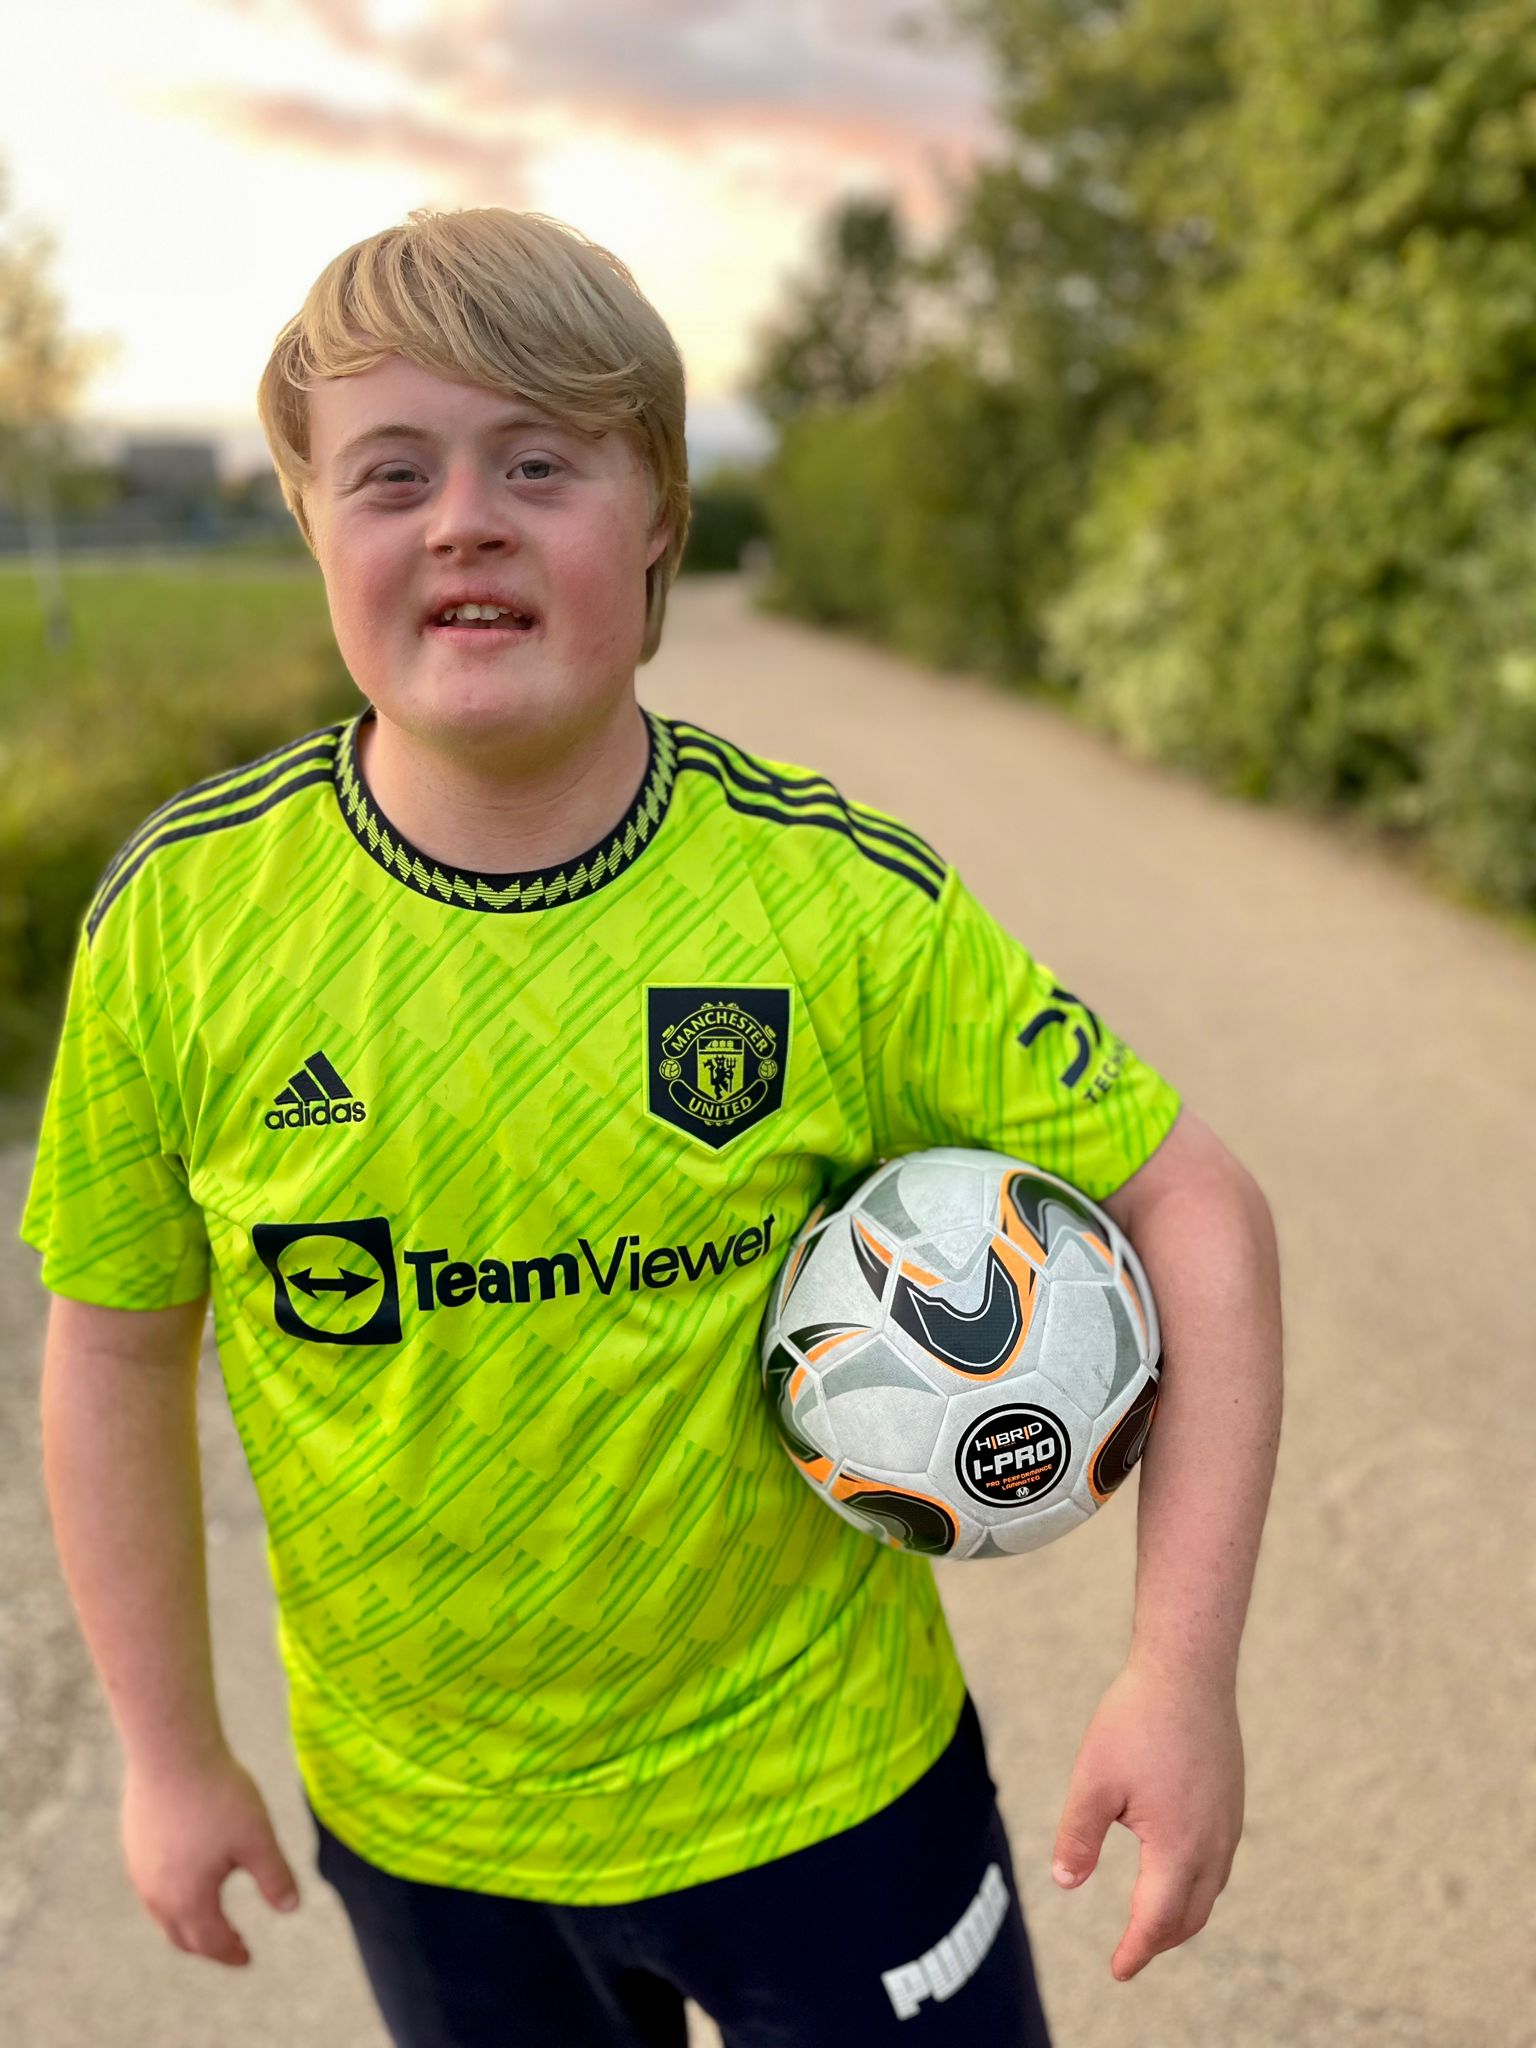 Boy wearing football strip and holding a football